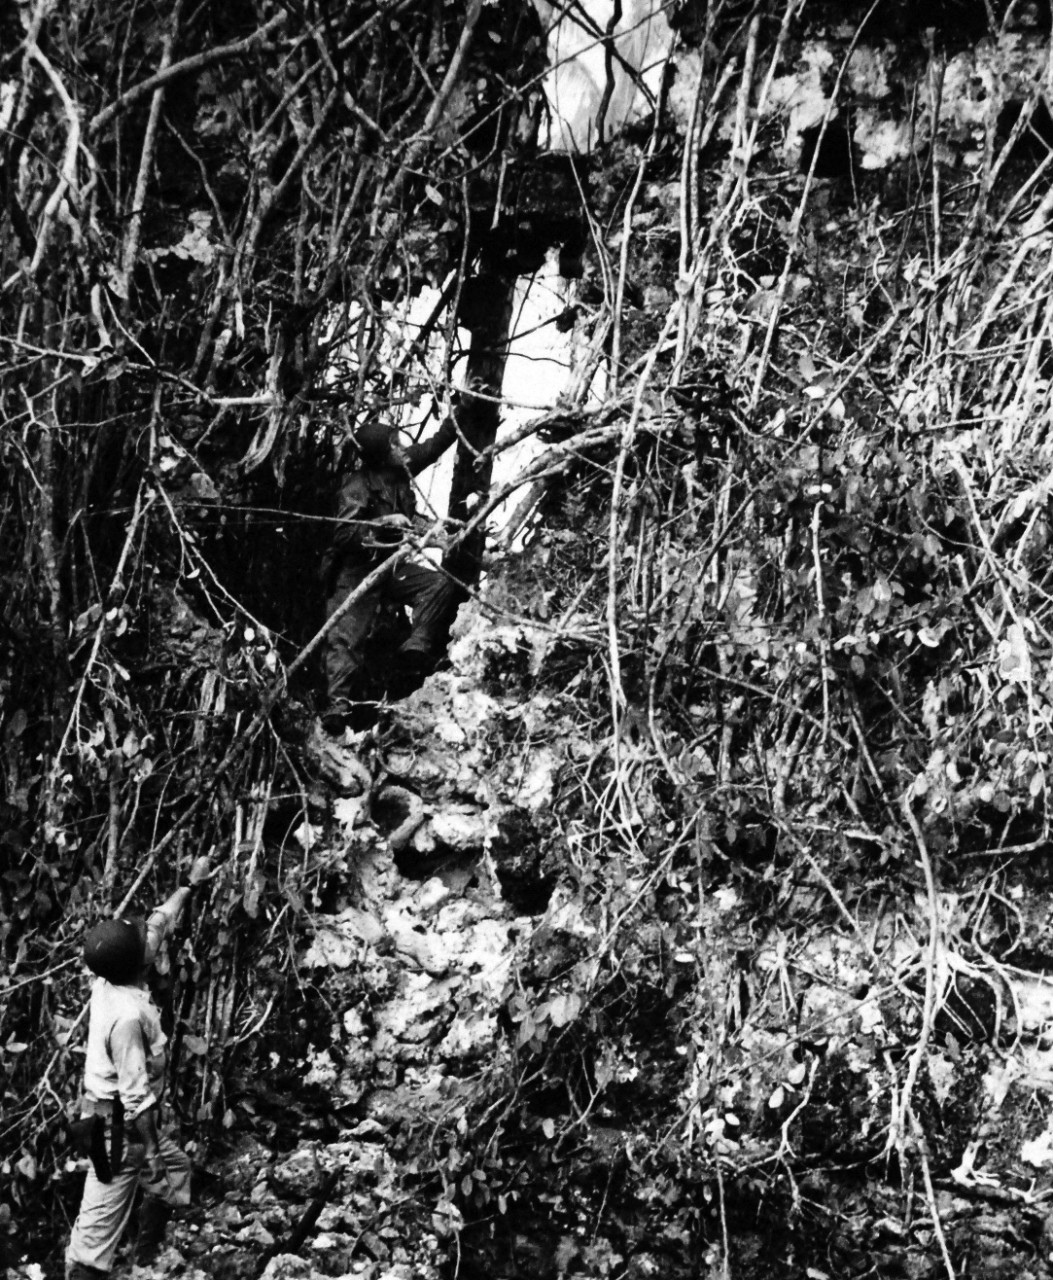 26-G-3570-Box 70-1:  Invasion of Leyte, Philippines, 20 October 1944.  The Exterminators Probe Leyte’s Jungles.  In Cliffside caves, curtained by the tangled jungle vines and creepers, Japanese snipers ply their deadly business of picking-off American soldiers and Coast Guardsmen occupying Leyte Island.  Here, two Yankees cautiously inch their way toward a pocket from which they suspect death had been spouting.   They were the exterminators, mopping up the Japanese that shoot from sniper nests.  Official U.S. Coast Guard photograph, now in the collections of the National Archives.   (2015/12/15).